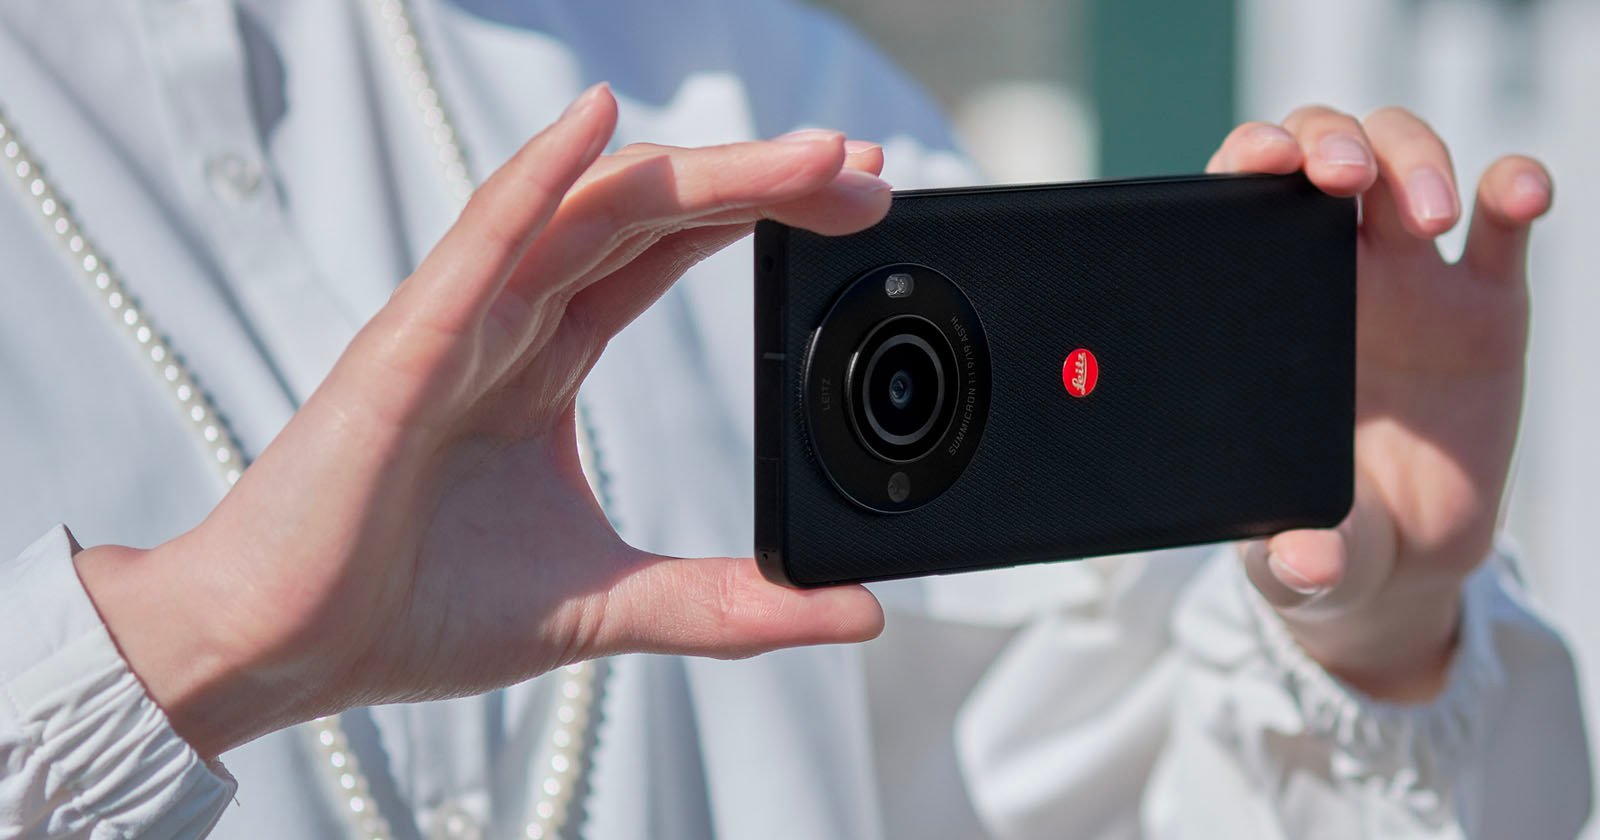 Leica’s Leitz Phone 3 Pairs Big Sensor with New Modes, but is Japan-Only